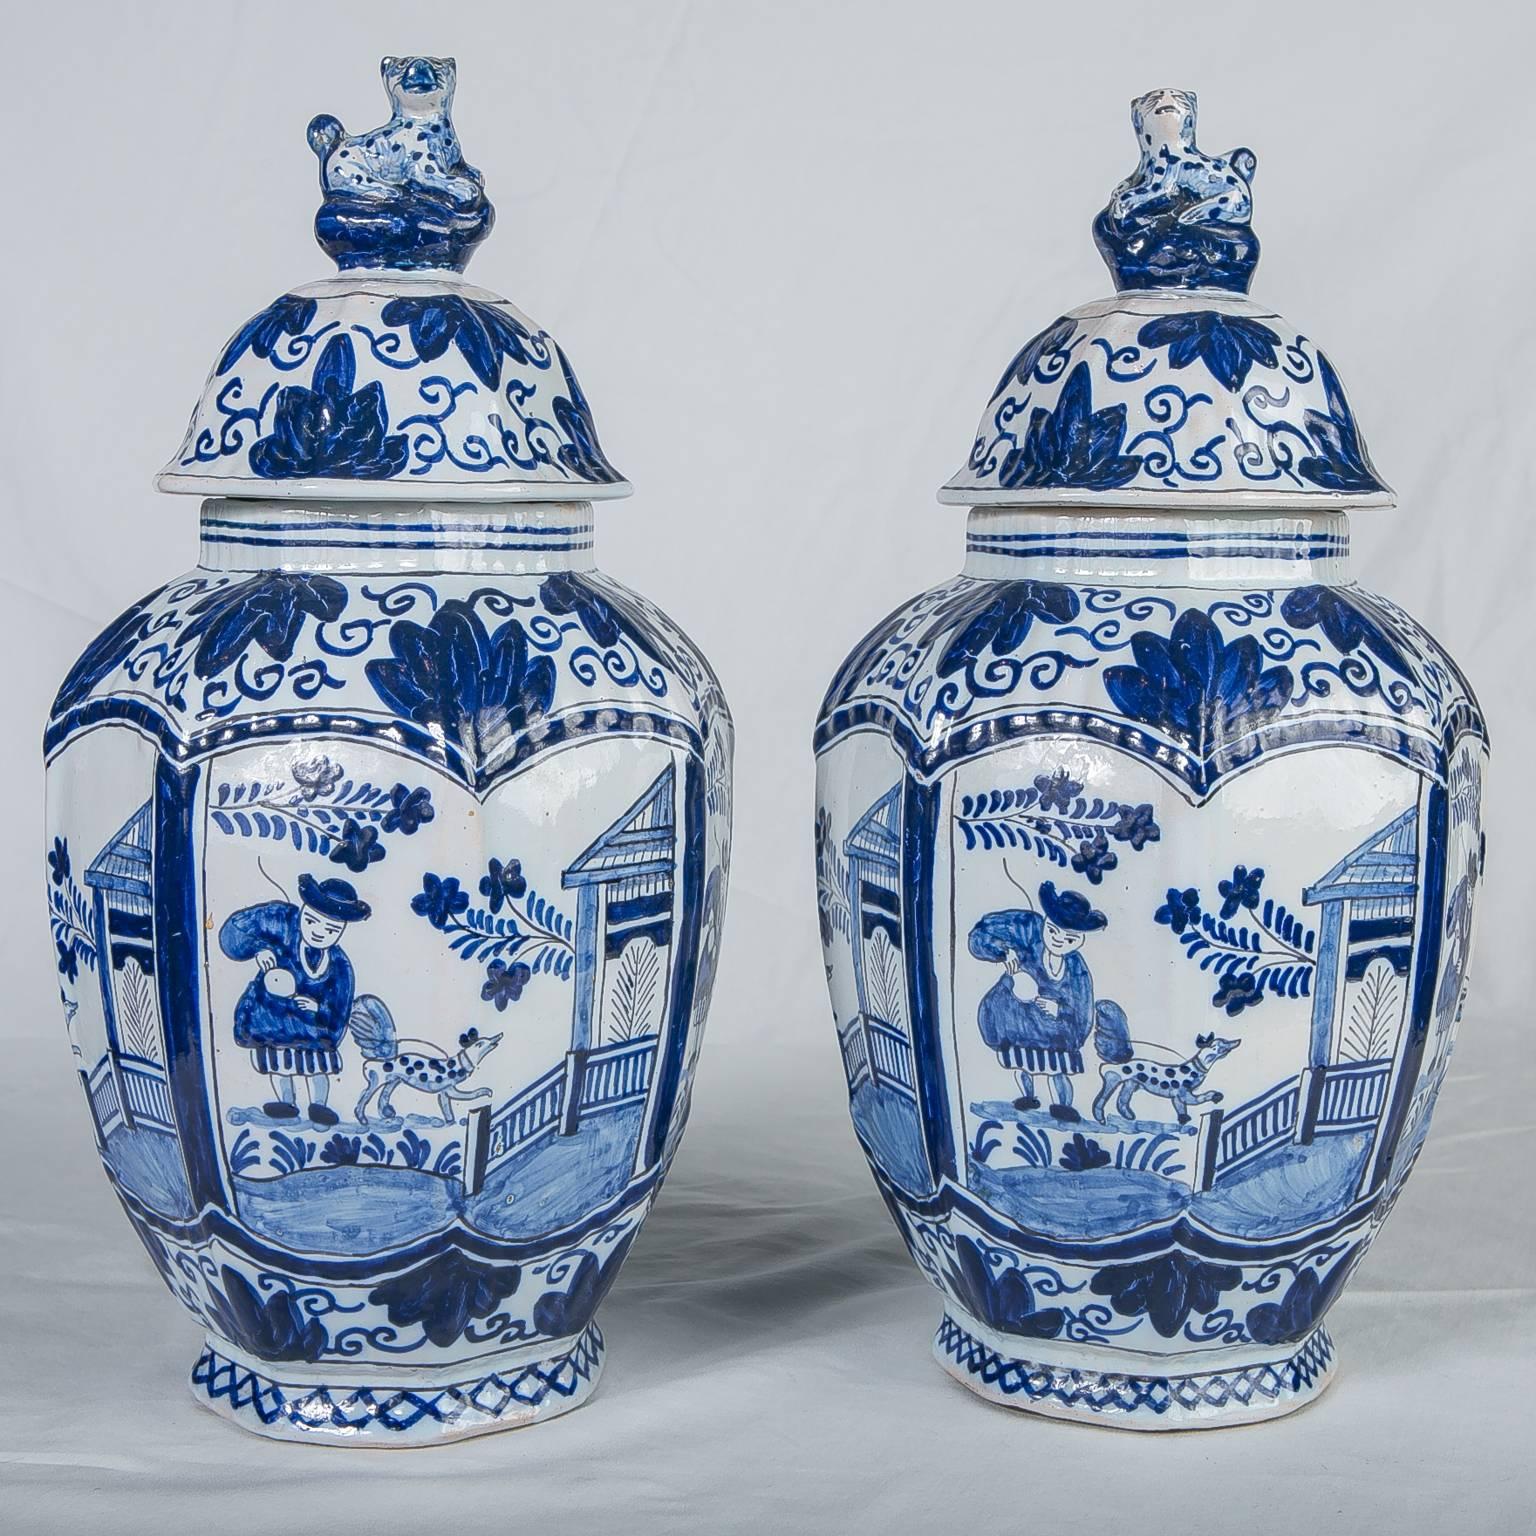 A pair of Dutch delft covered jars with panels painted in deep cobalt blue showing a chinoiserie scene of a boy and his dog walking near a pagoda.
The covered jars topped by traditional leopard finials.
Made in the Netherlands in the first half of